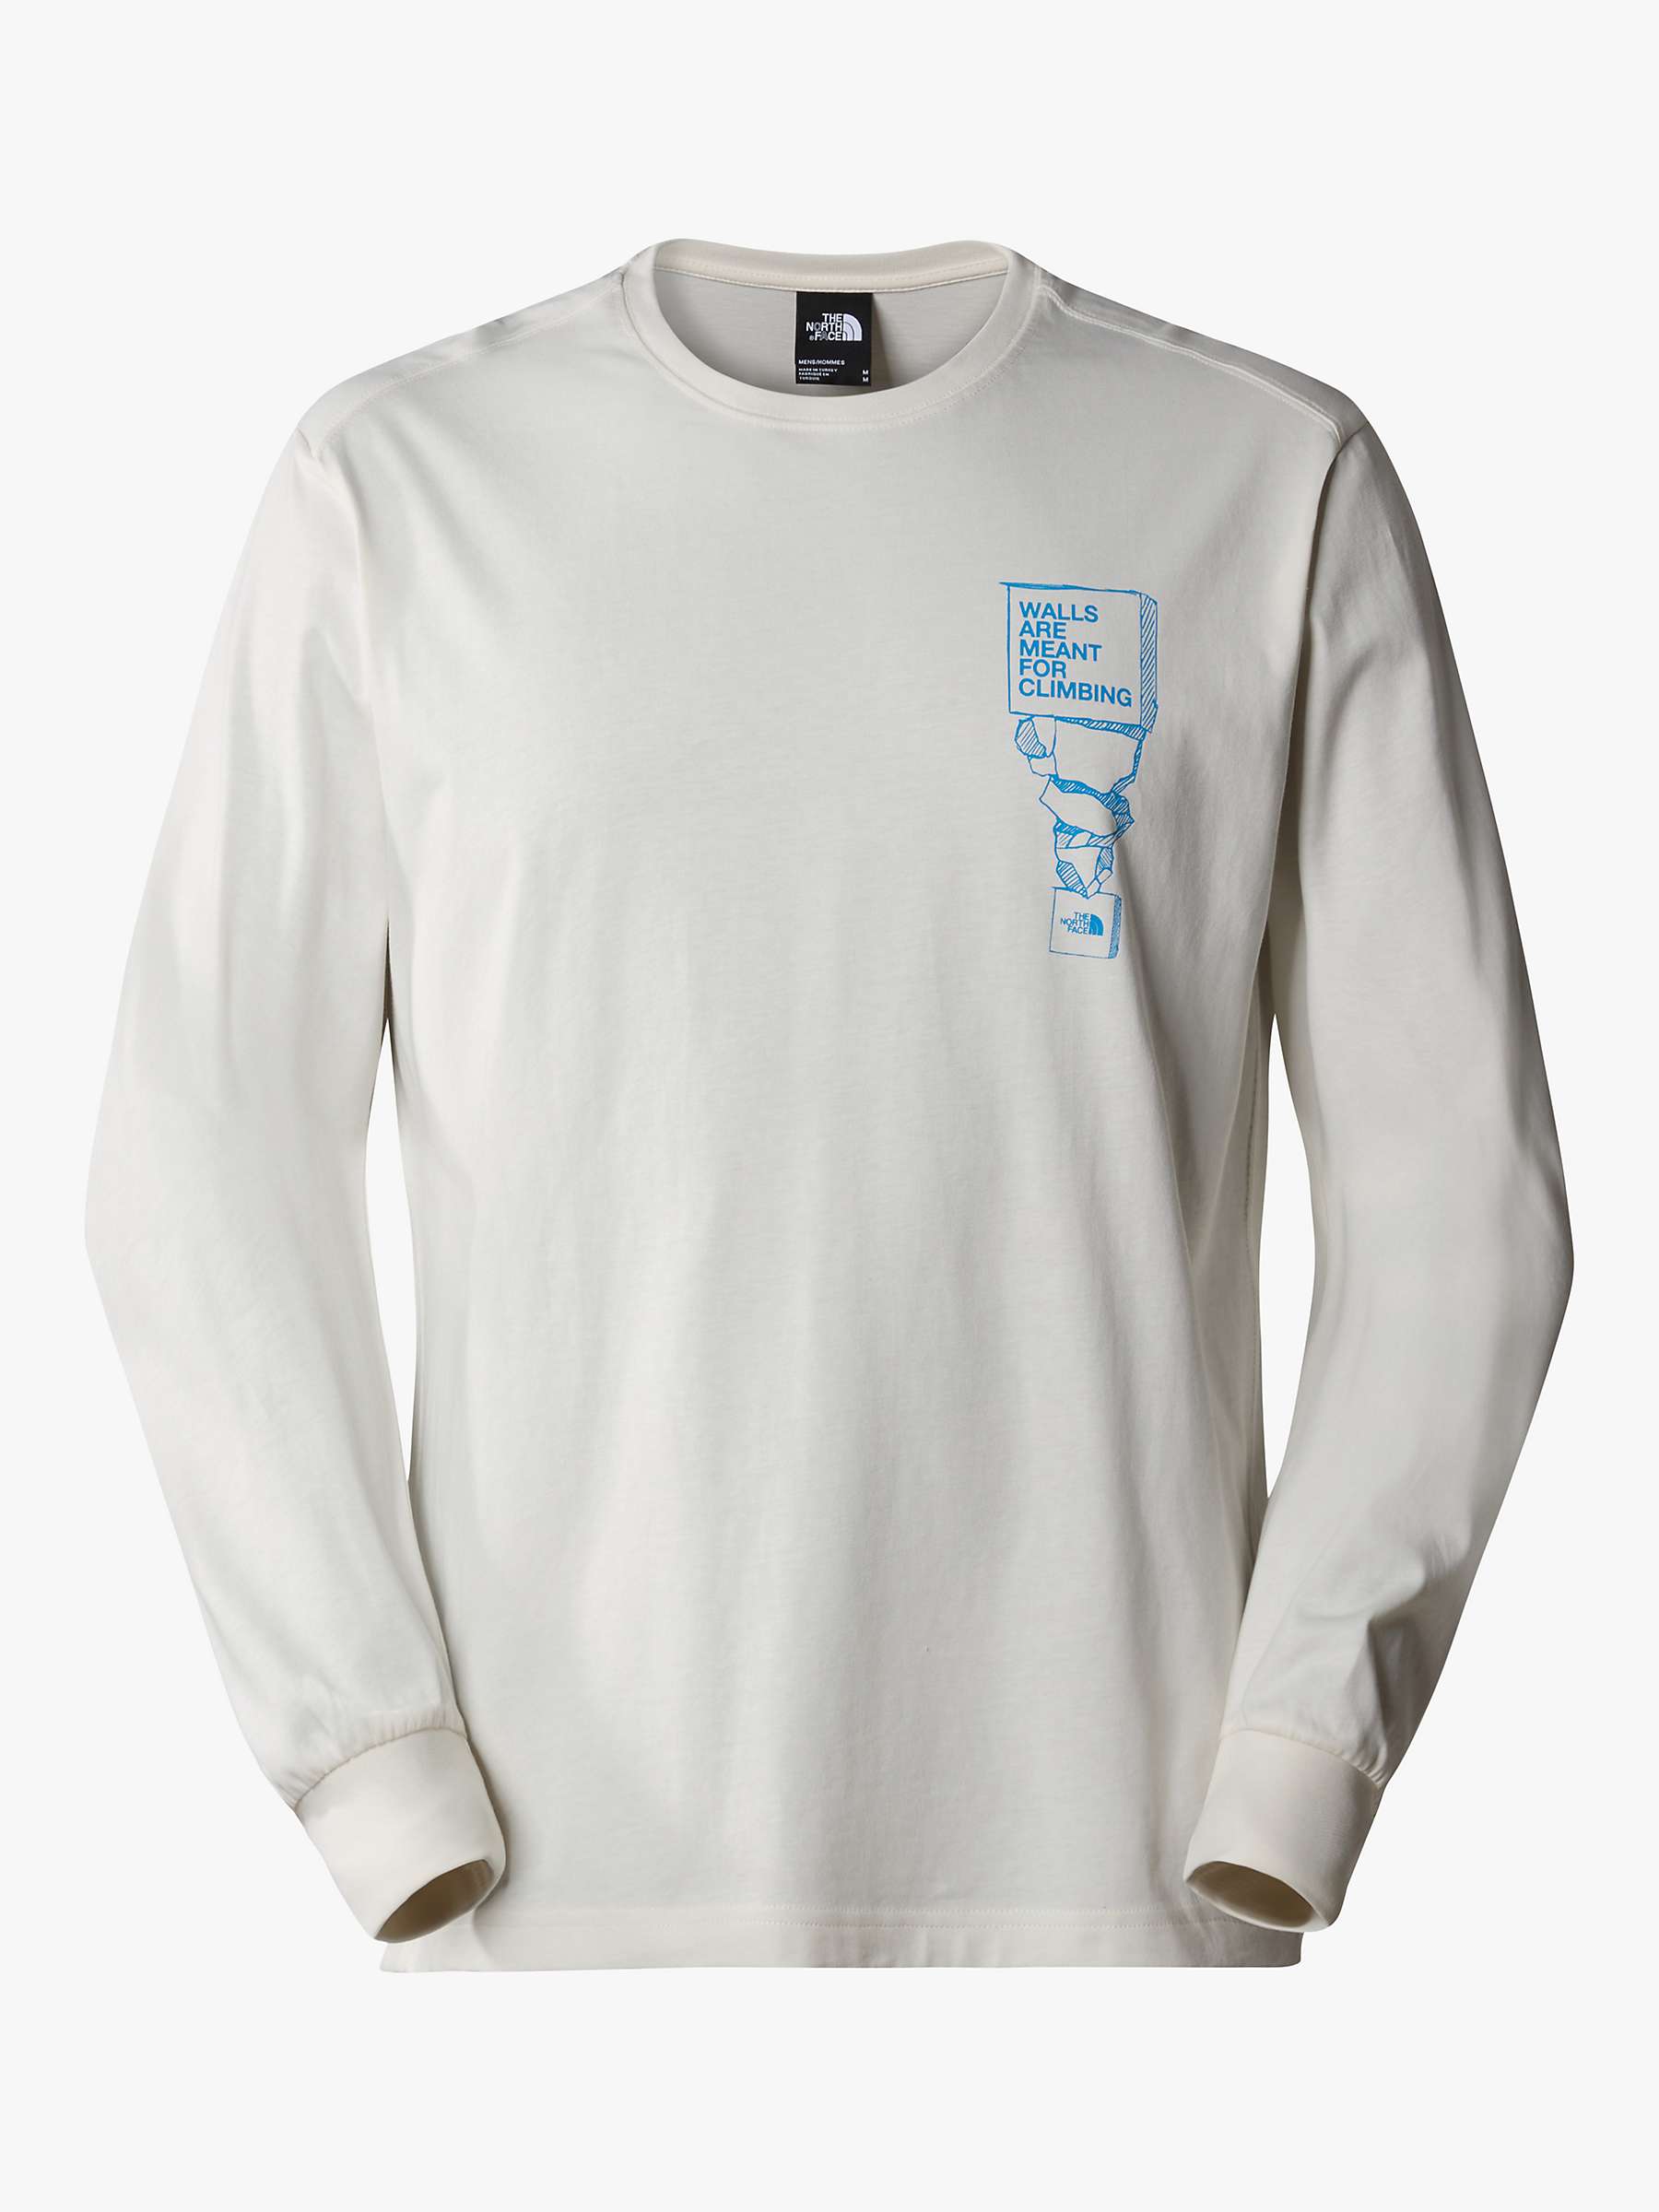 Buy The North Face Outdoor Long Sleeve T-Shirt, White Dune Online at johnlewis.com